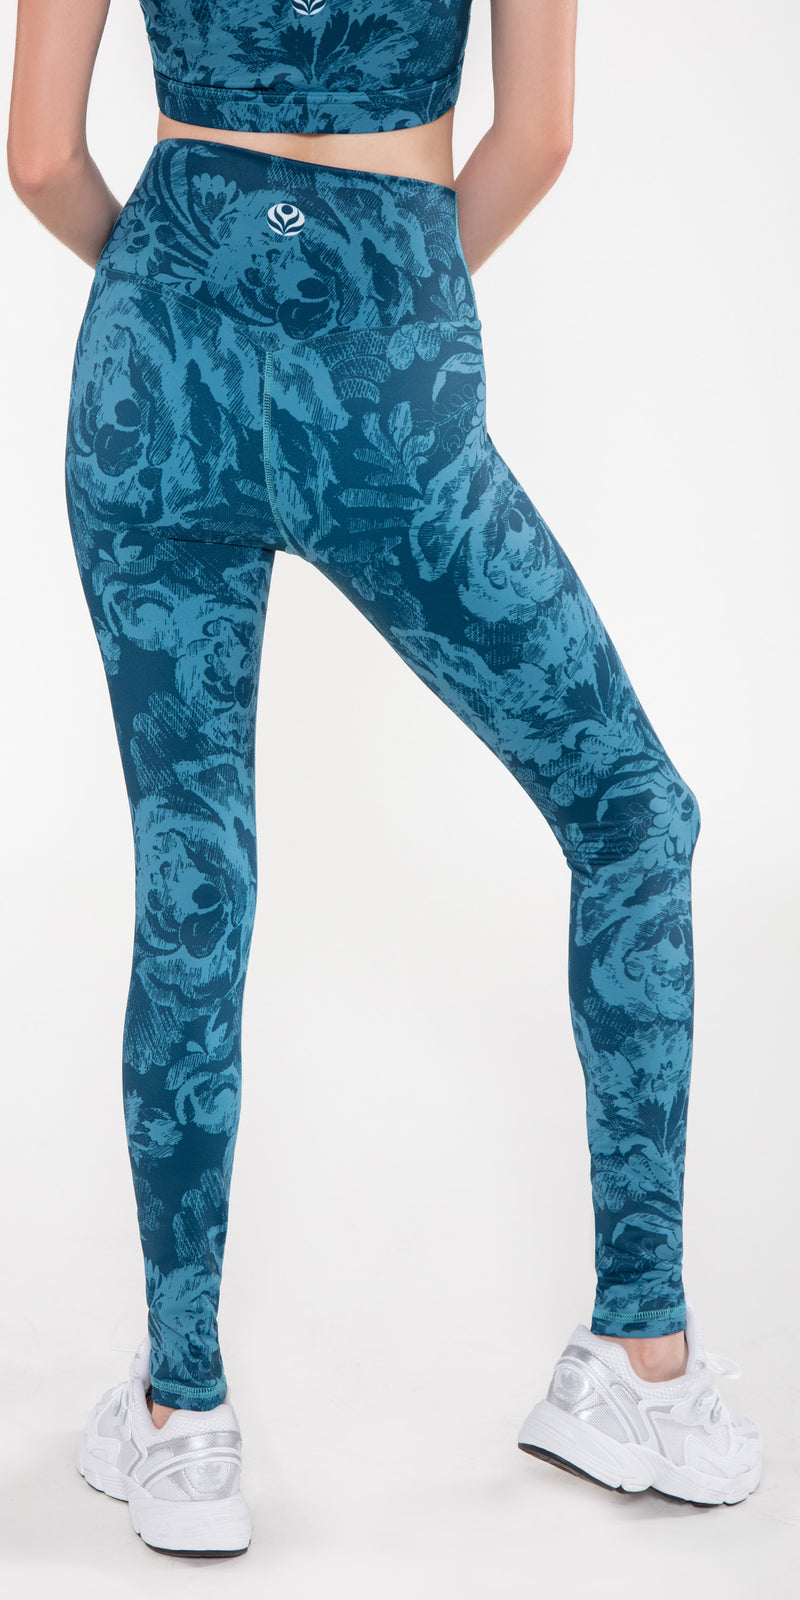 Love Nelli with Shelly - Lotus Elle Lux Capri Leggings!!  https://bit.ly/3wUEaFa Buttery Soft, Super Stretchy and amazing to wear!  Yoga Waistband - They wont roll down! We have the most wonderful Funky